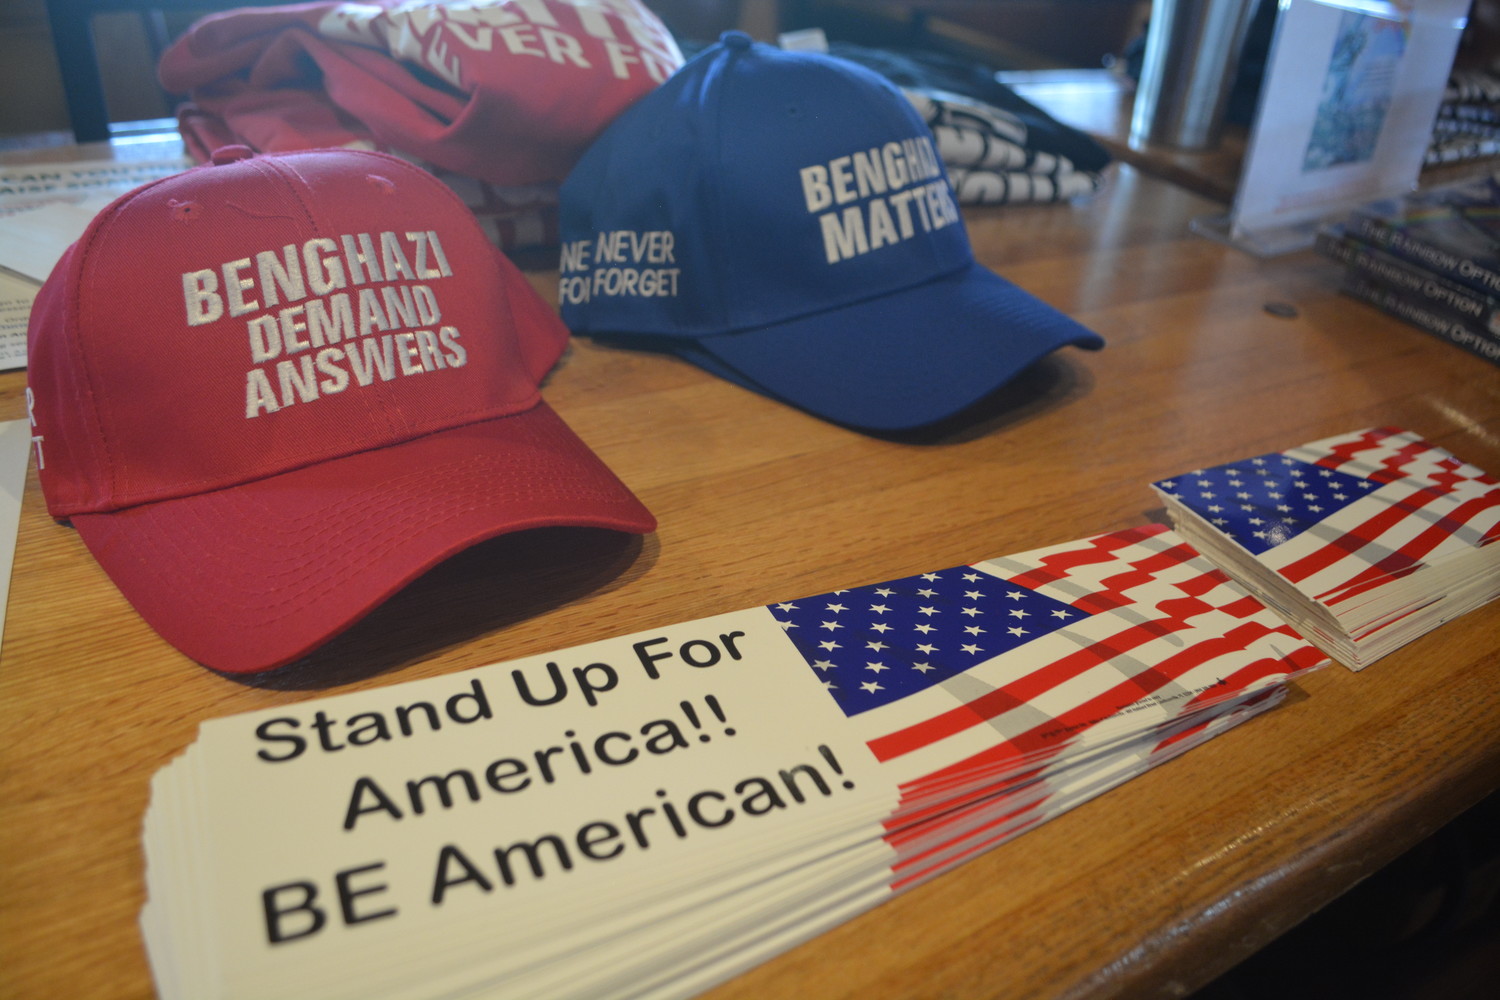 Benghazi ball caps and "Stand up for America" bumper stickers on sale at the veterans luncheon